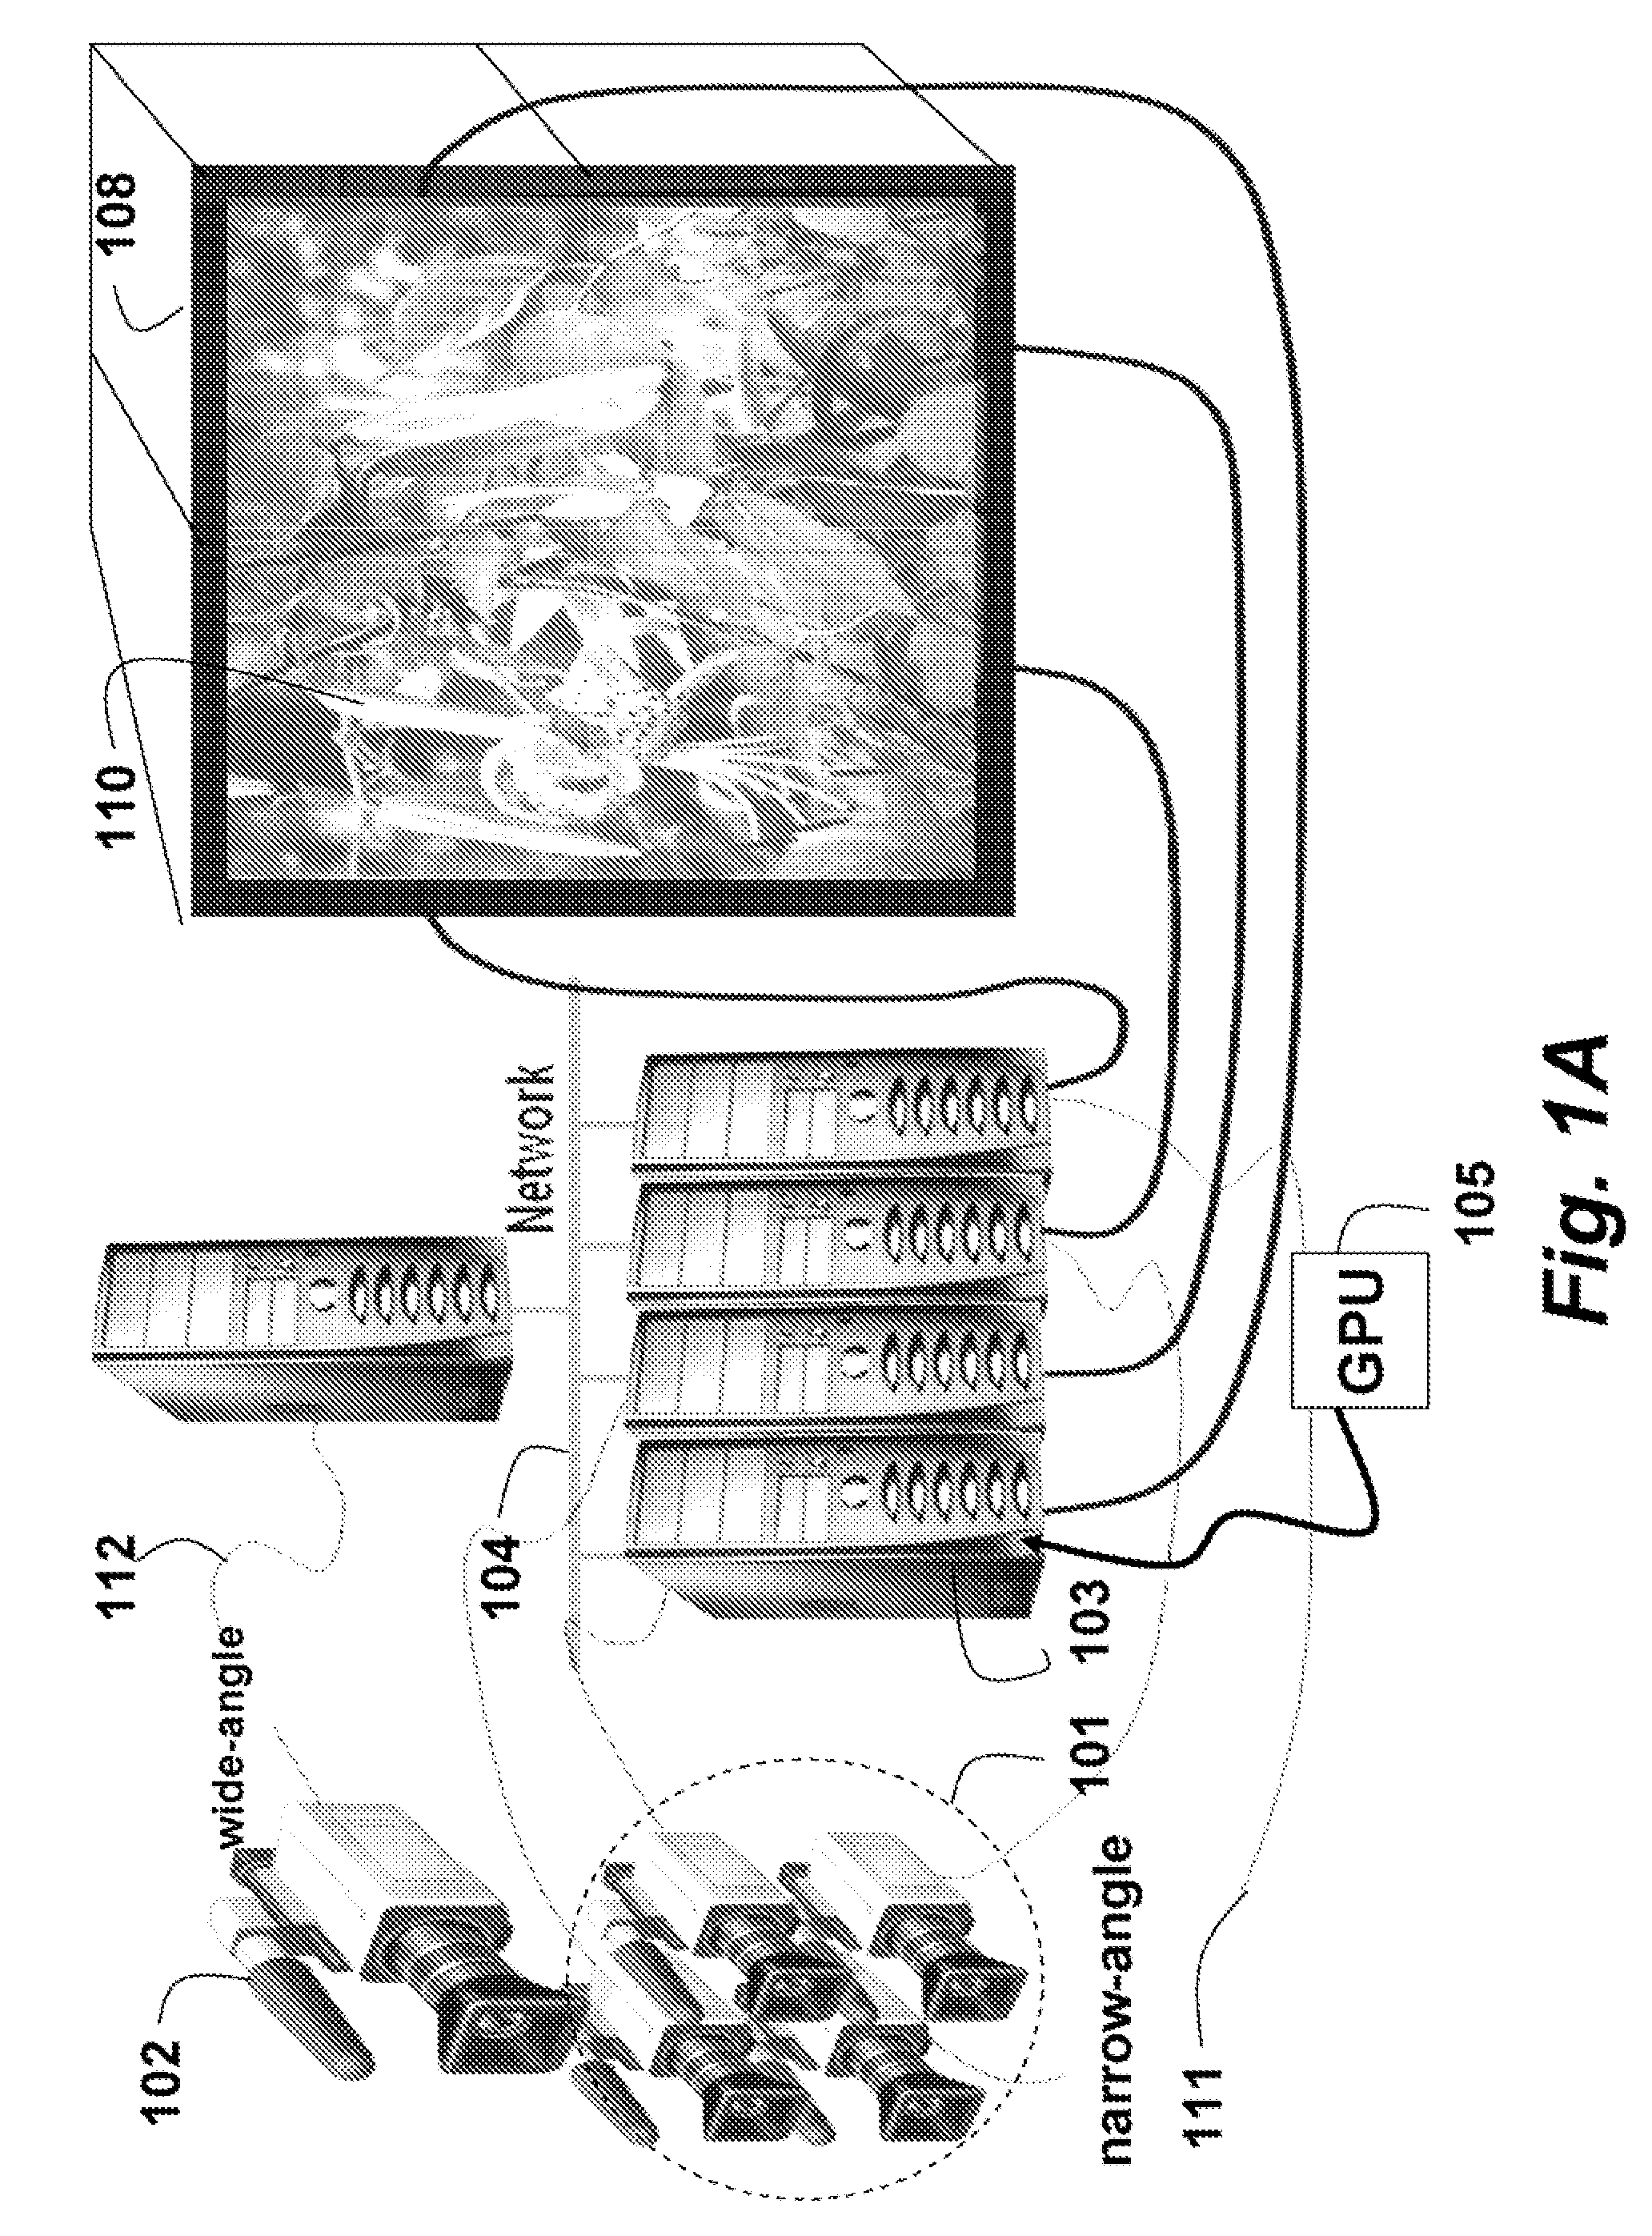 System and Method for Combining Image Sequences